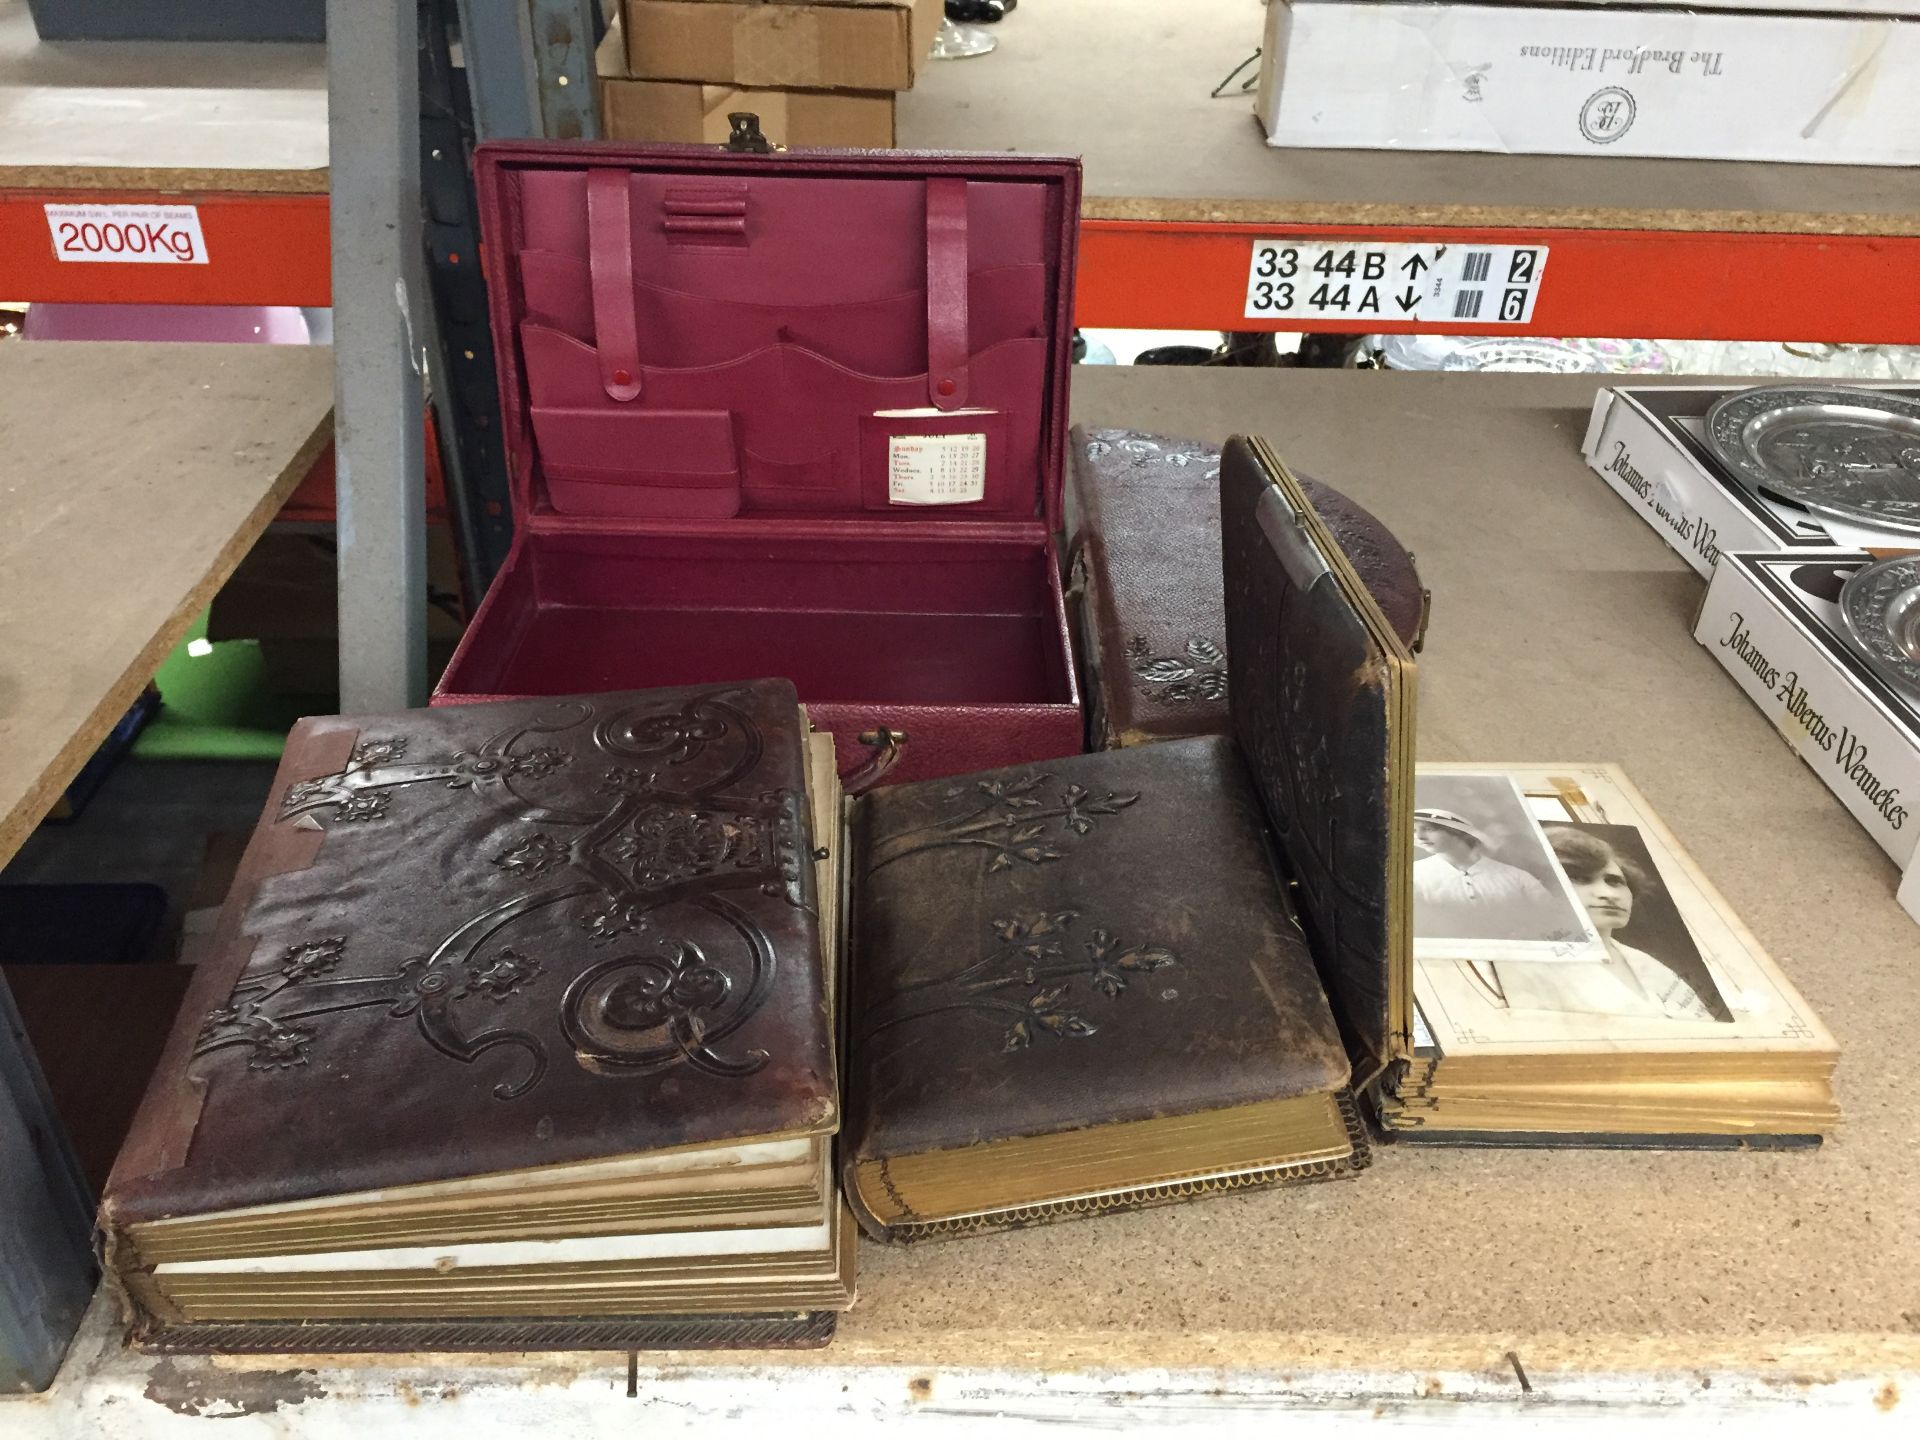 A COLLECTION OF VINTAGE LEATHER BOUND PHOTO ALBUMS OF MARITIME INTEREST AND FURTHER BOX